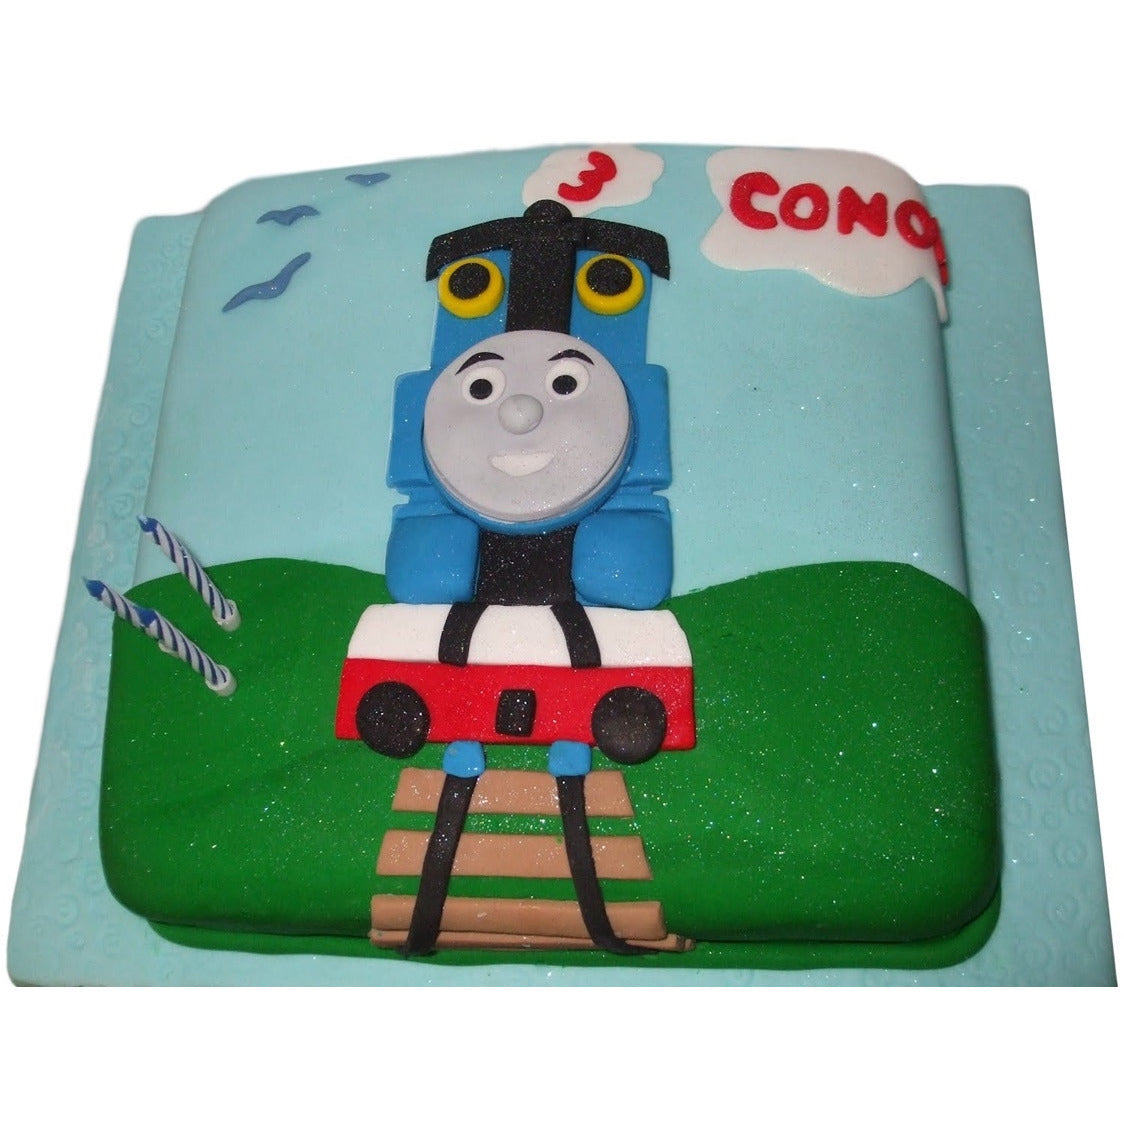 undefined by undefined | Gift thomas-and-friends-cake Online | Buy Now